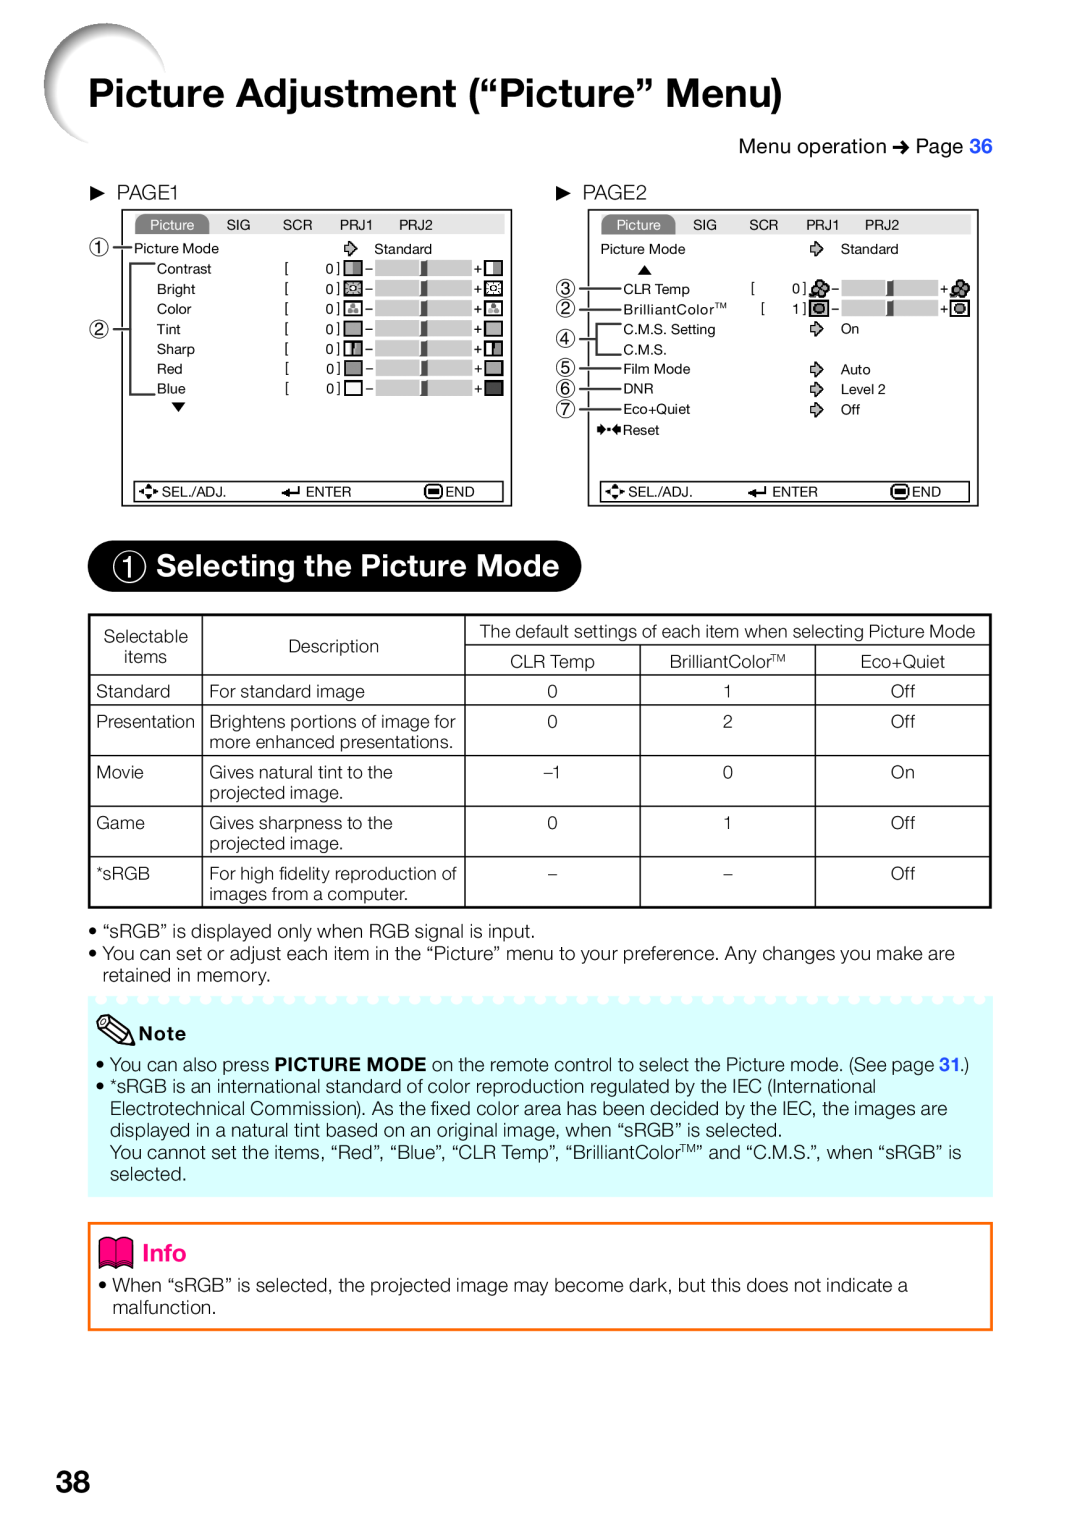 Sharp PG-LW2000, PGLW2000 appendix Picture Adjustment “Picture” Menu, Selecting the Picture Mode, Info 